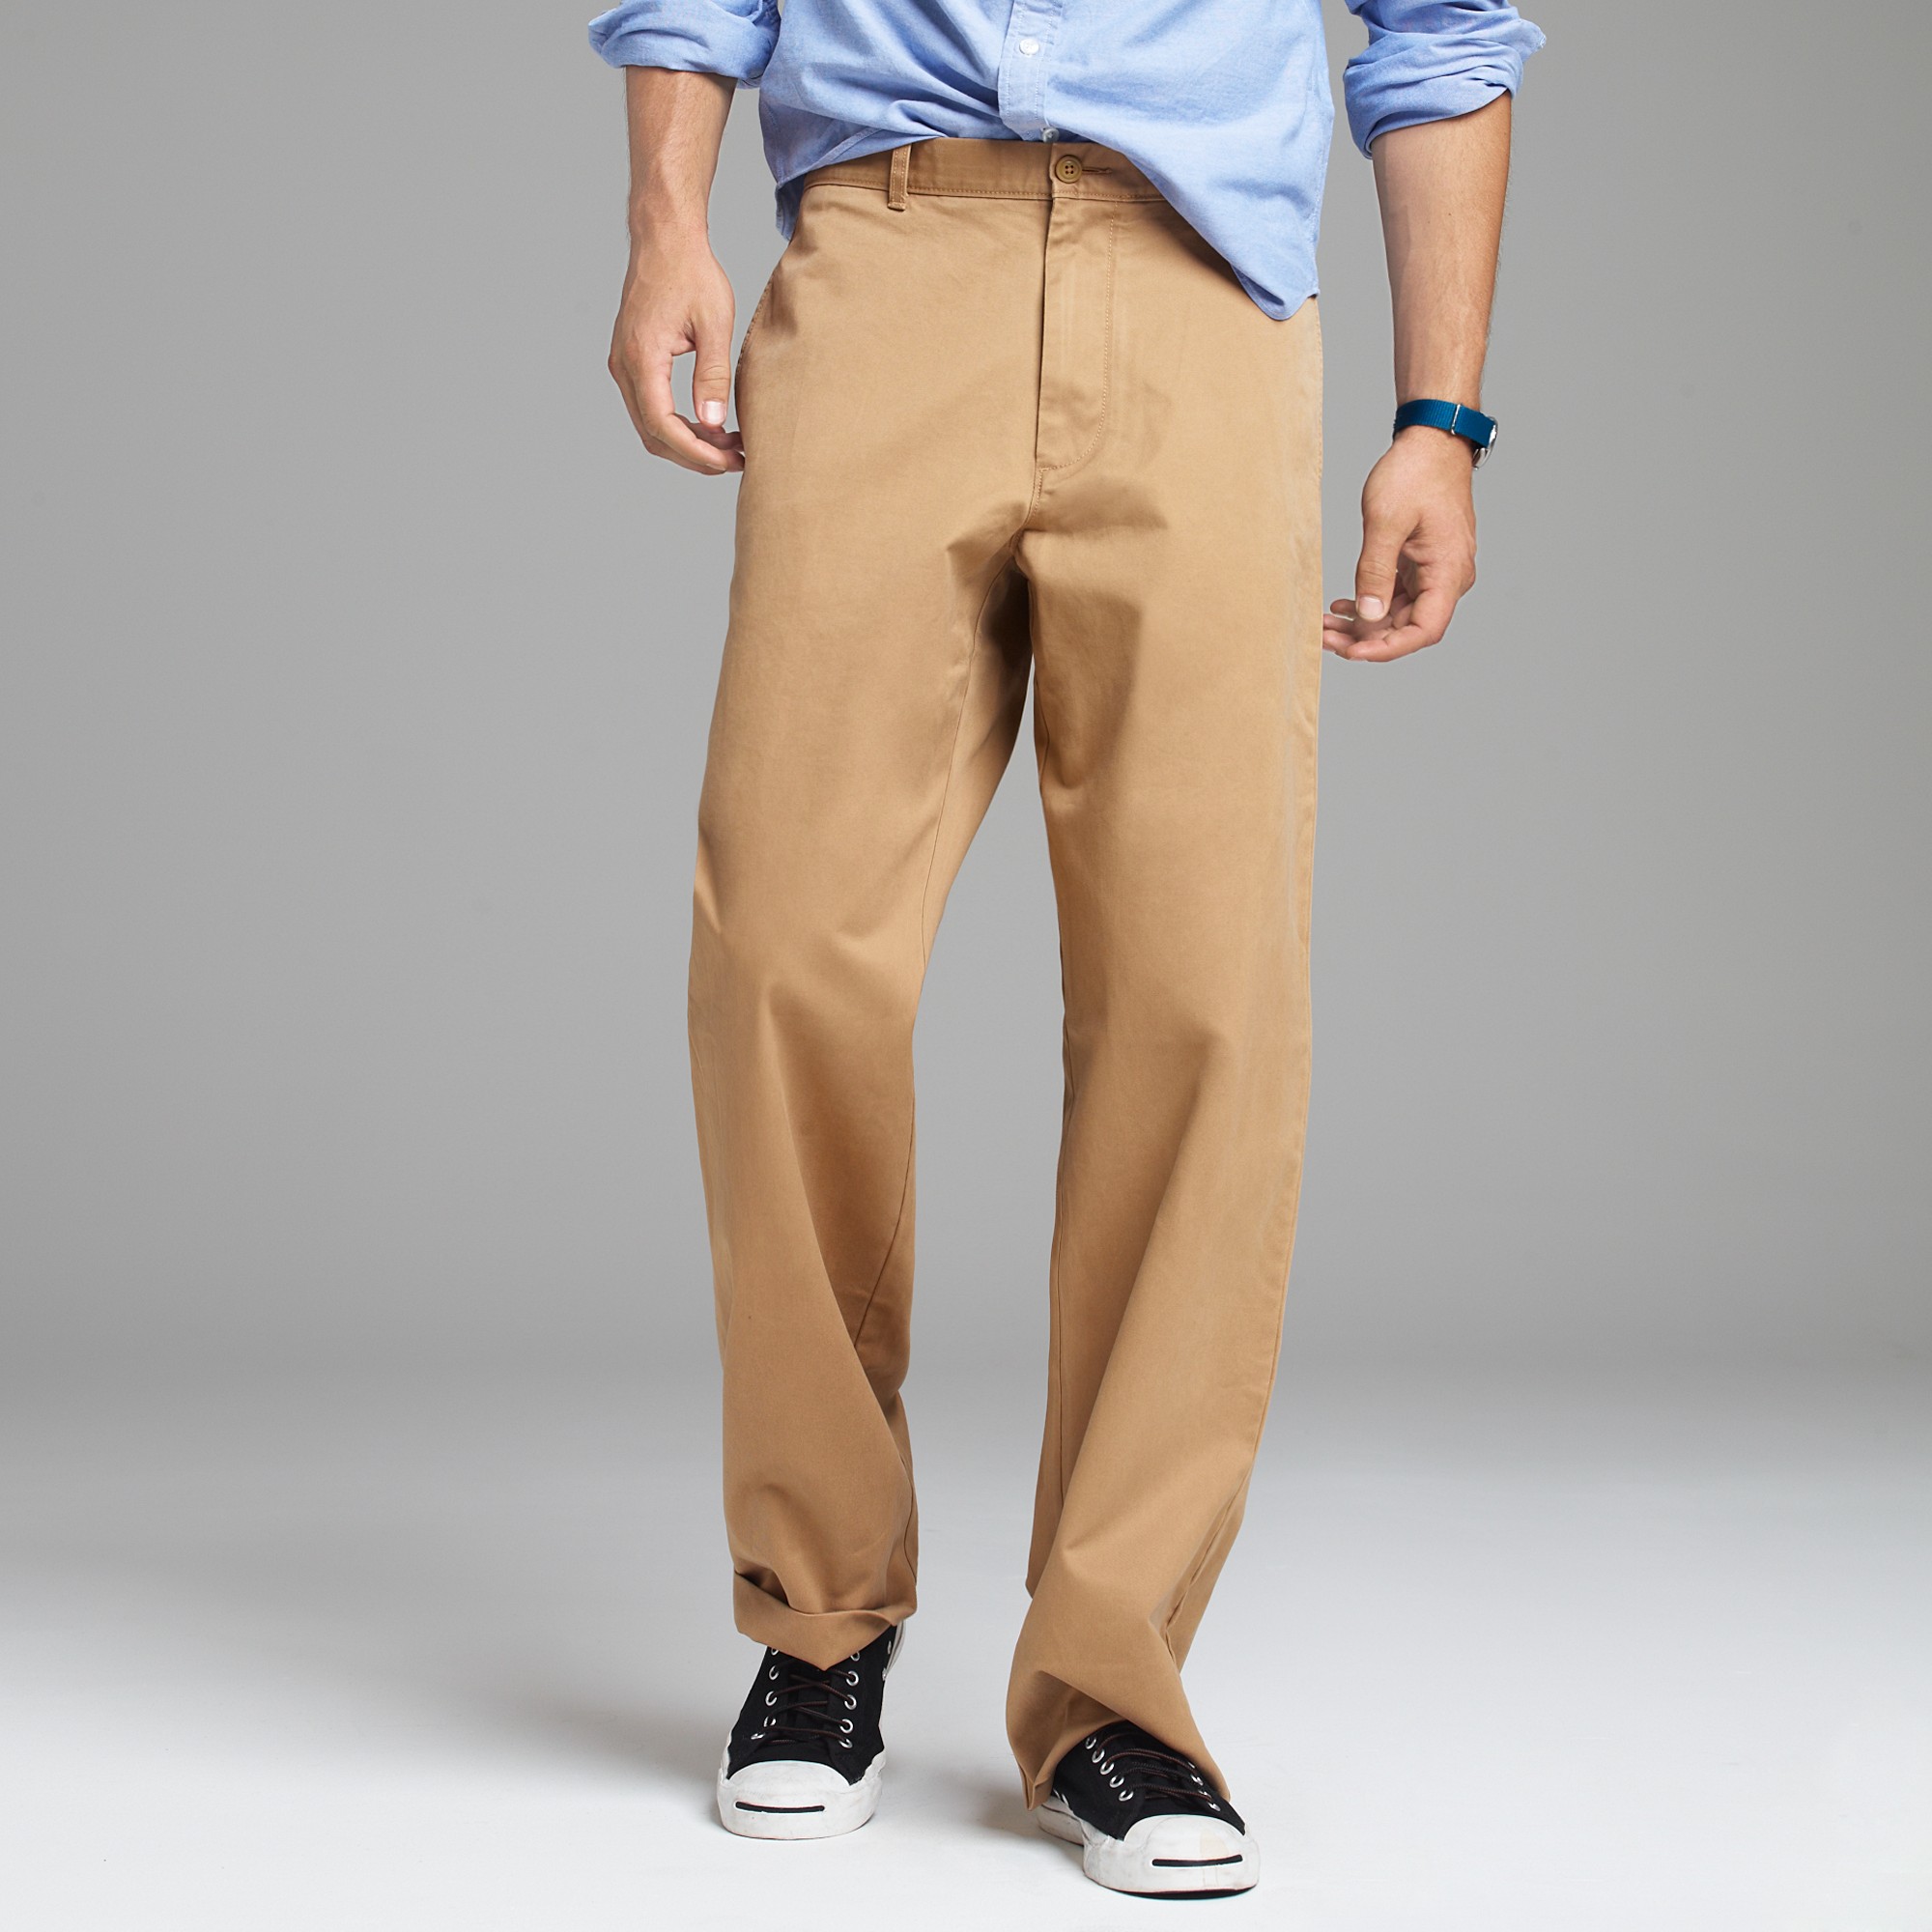 J Crew Giant Fit Chino - www.inf-inet.com